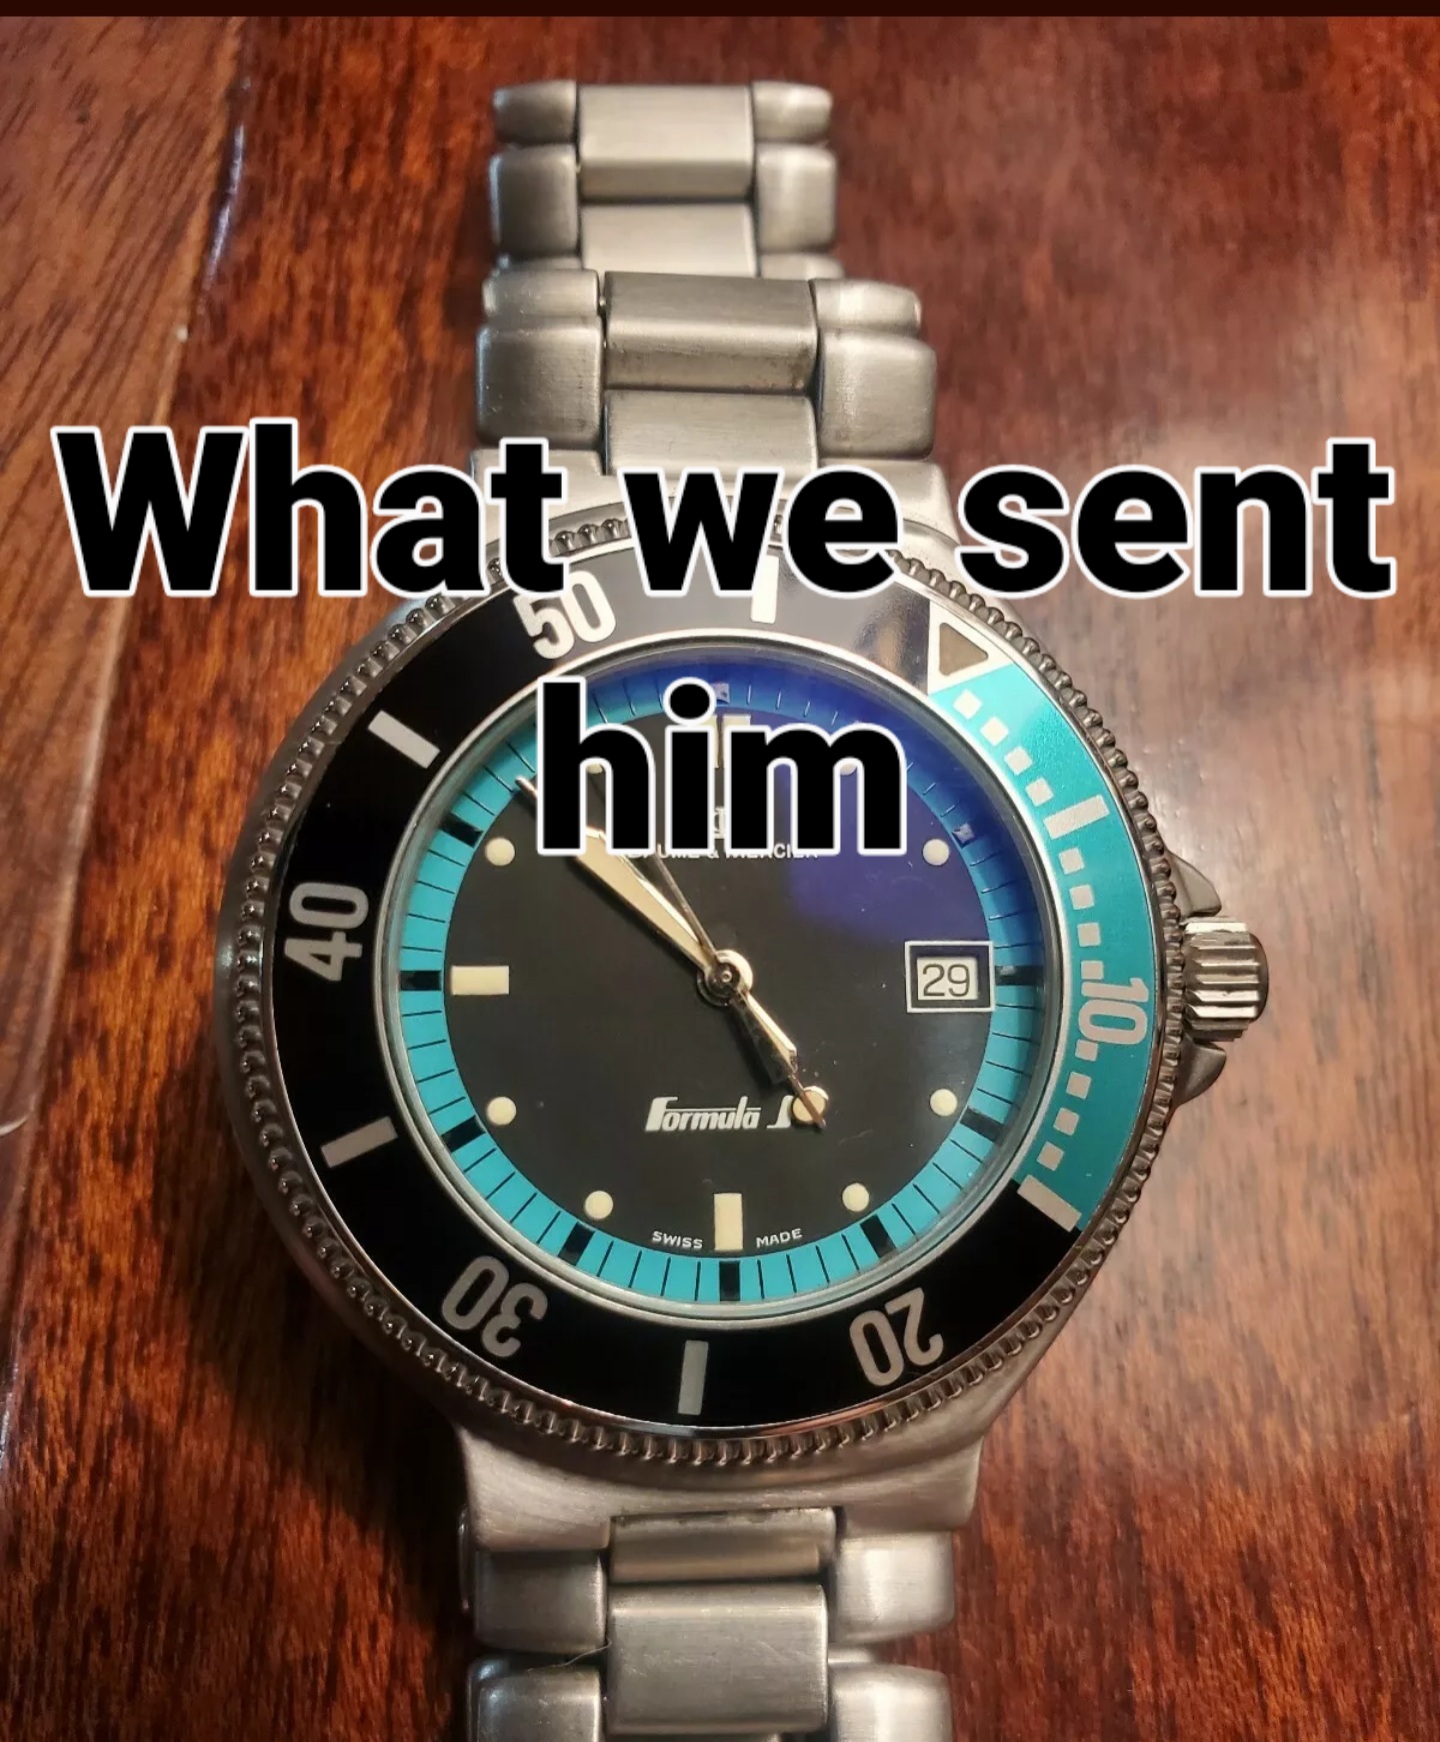 The watch we had on ebay and sent